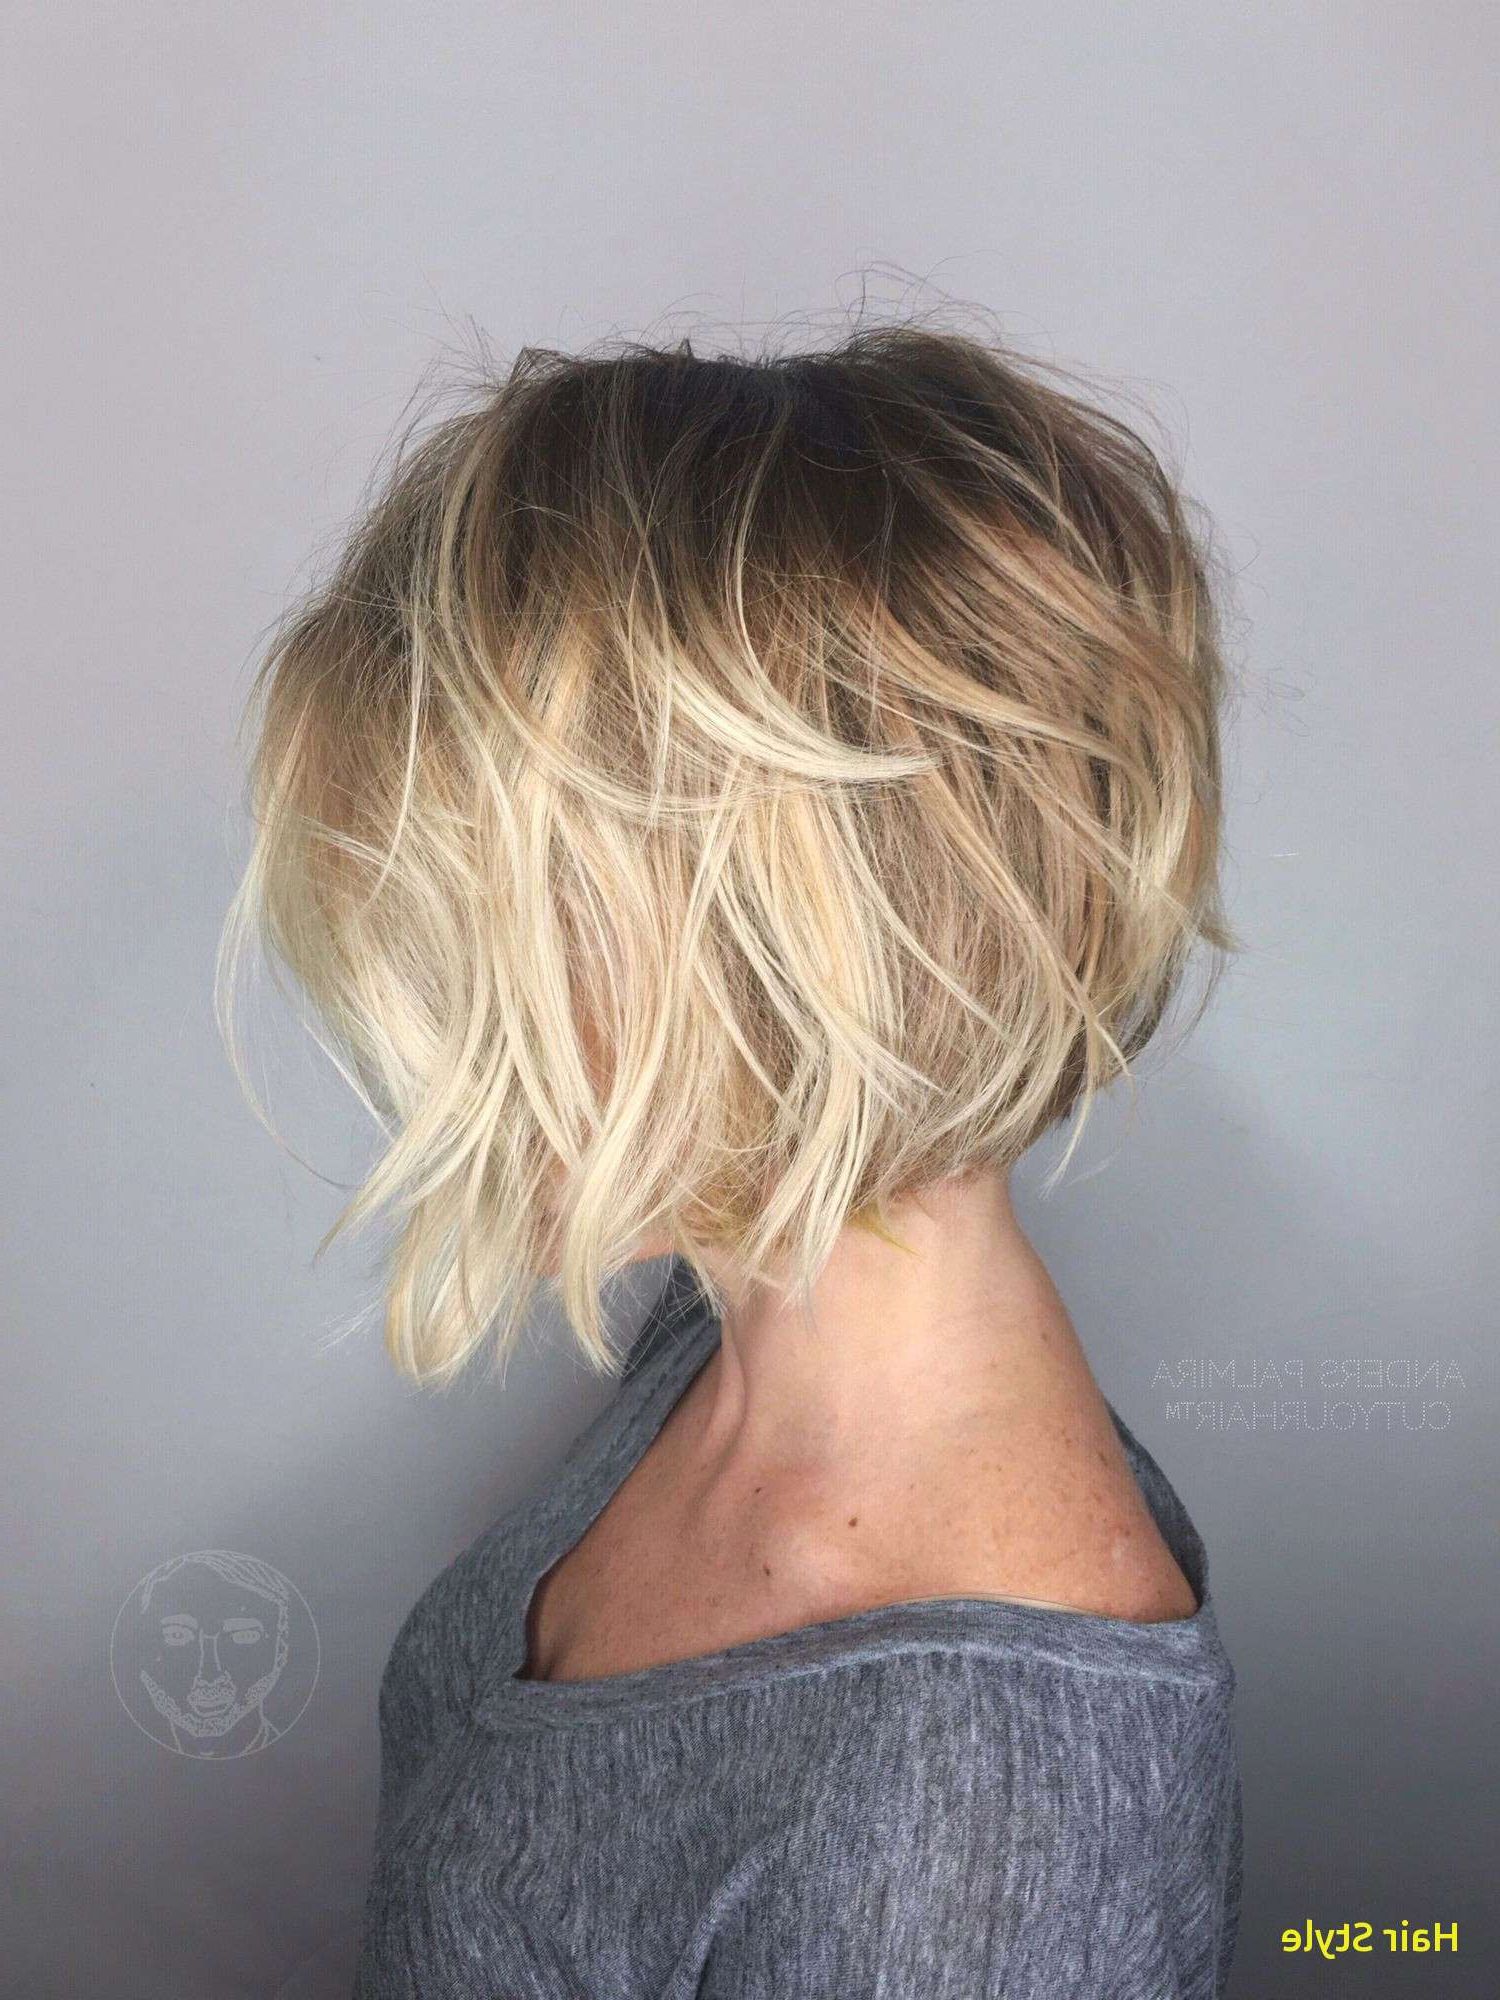 20 Best Of Cute Short Haircuts For Thin Hair | Hairstyles Wanted Co In Cute Short Haircuts For Thin Hair (View 22 of 25)